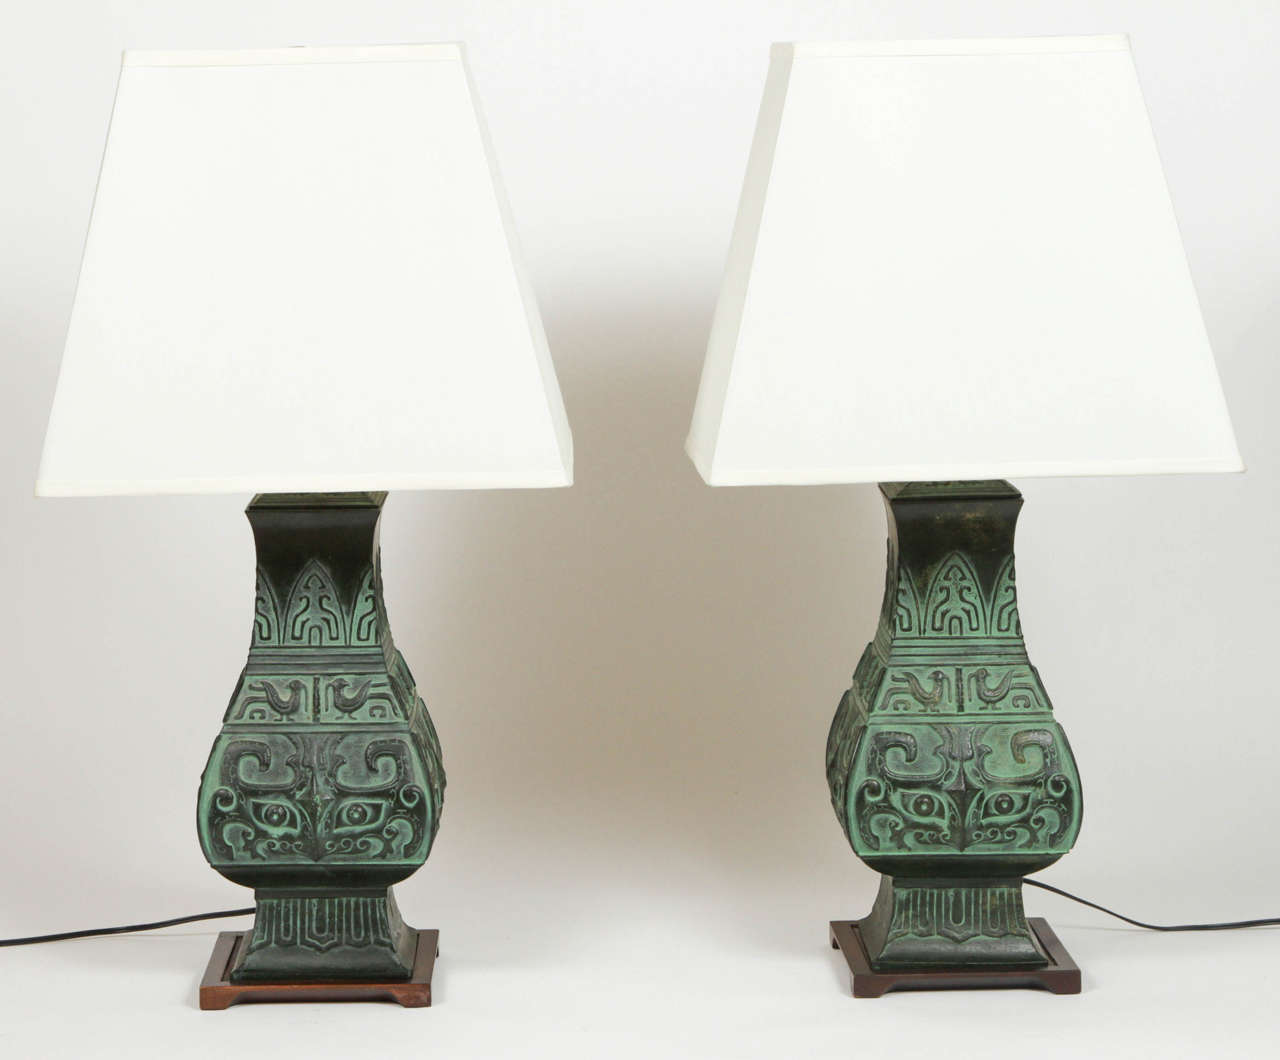 Pair of Archaic Chinese lamps with new silk shades. 
Shades measure 16 wide x 12 deep x 13.5 high (at widest point). 
Wood base.